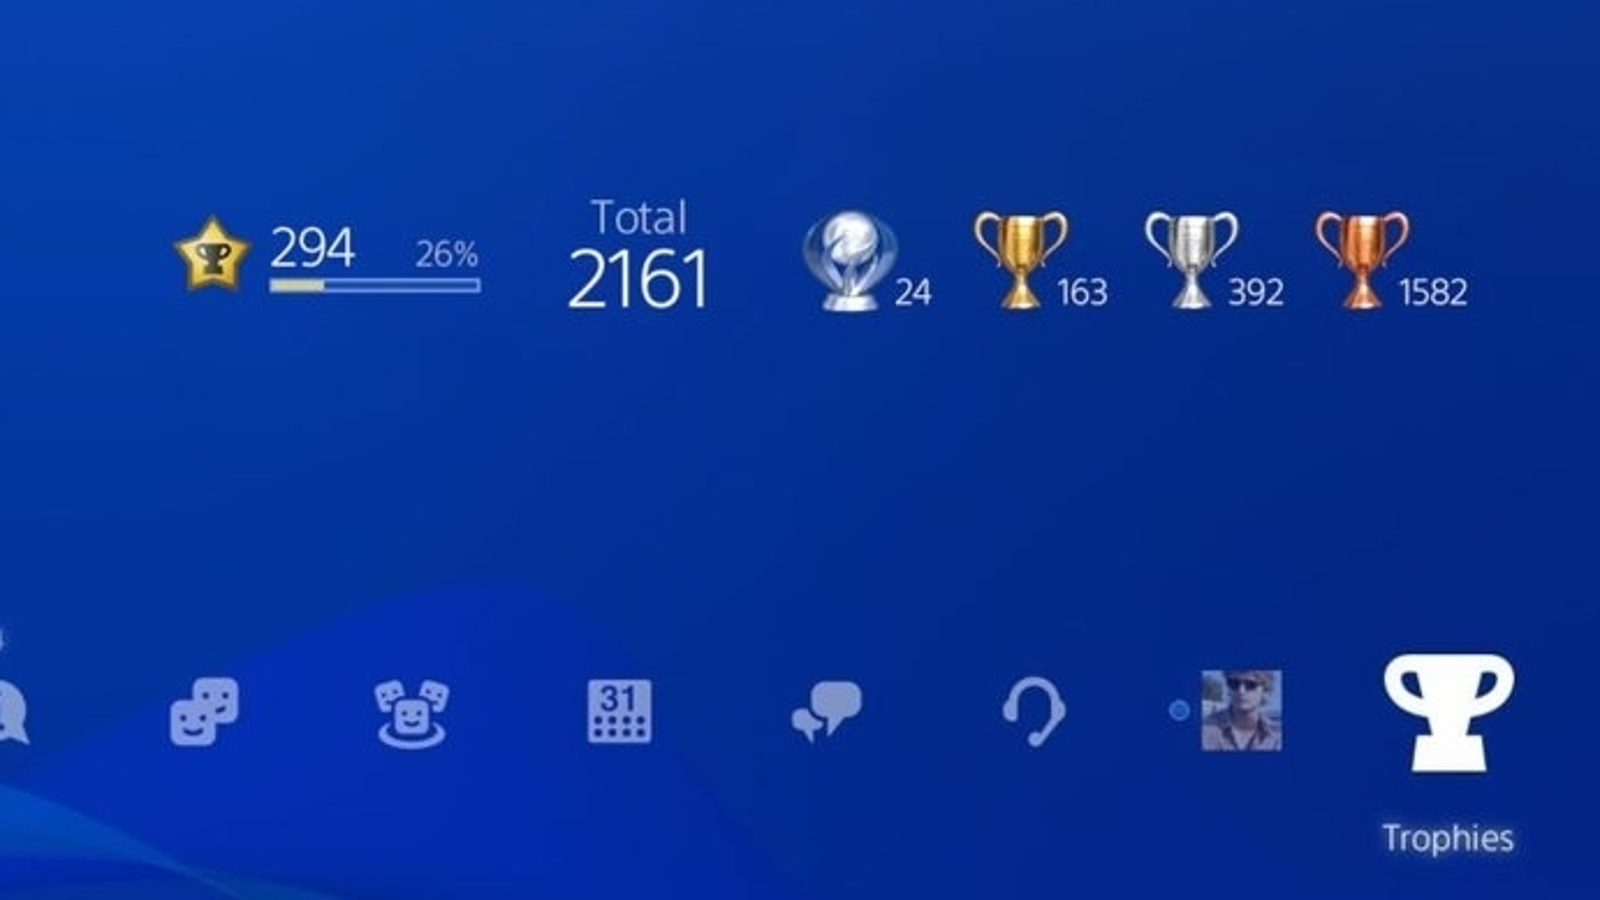 Roblox has launched on PS5 and PS4, but where are the trophies?